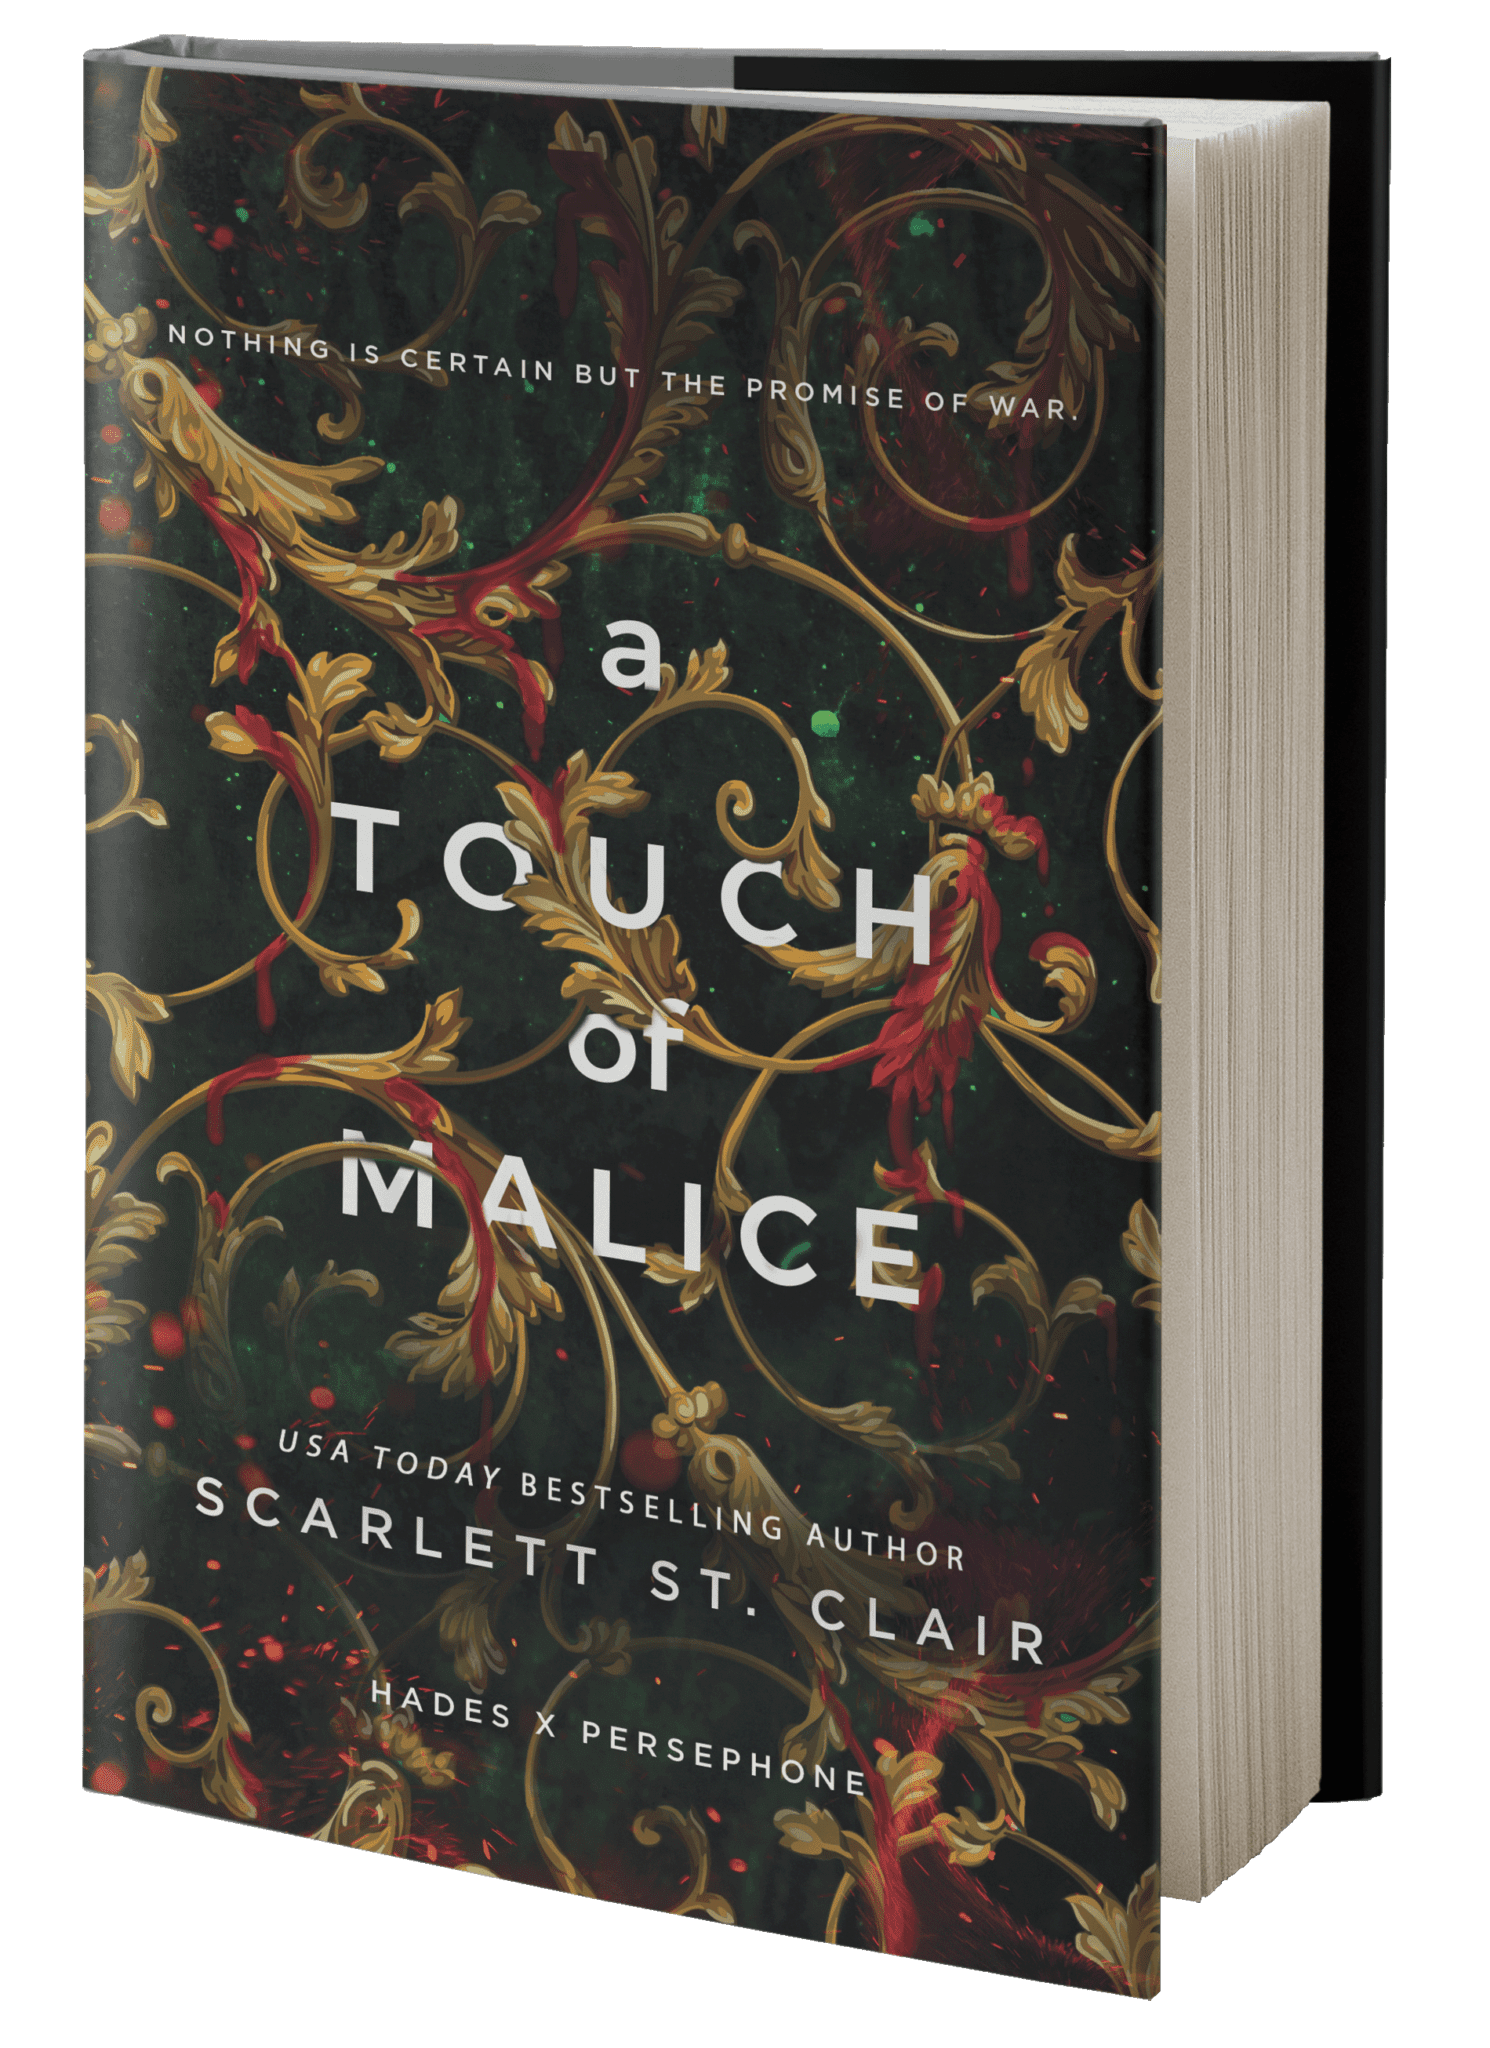 Book cover of "A Touch of Malice"